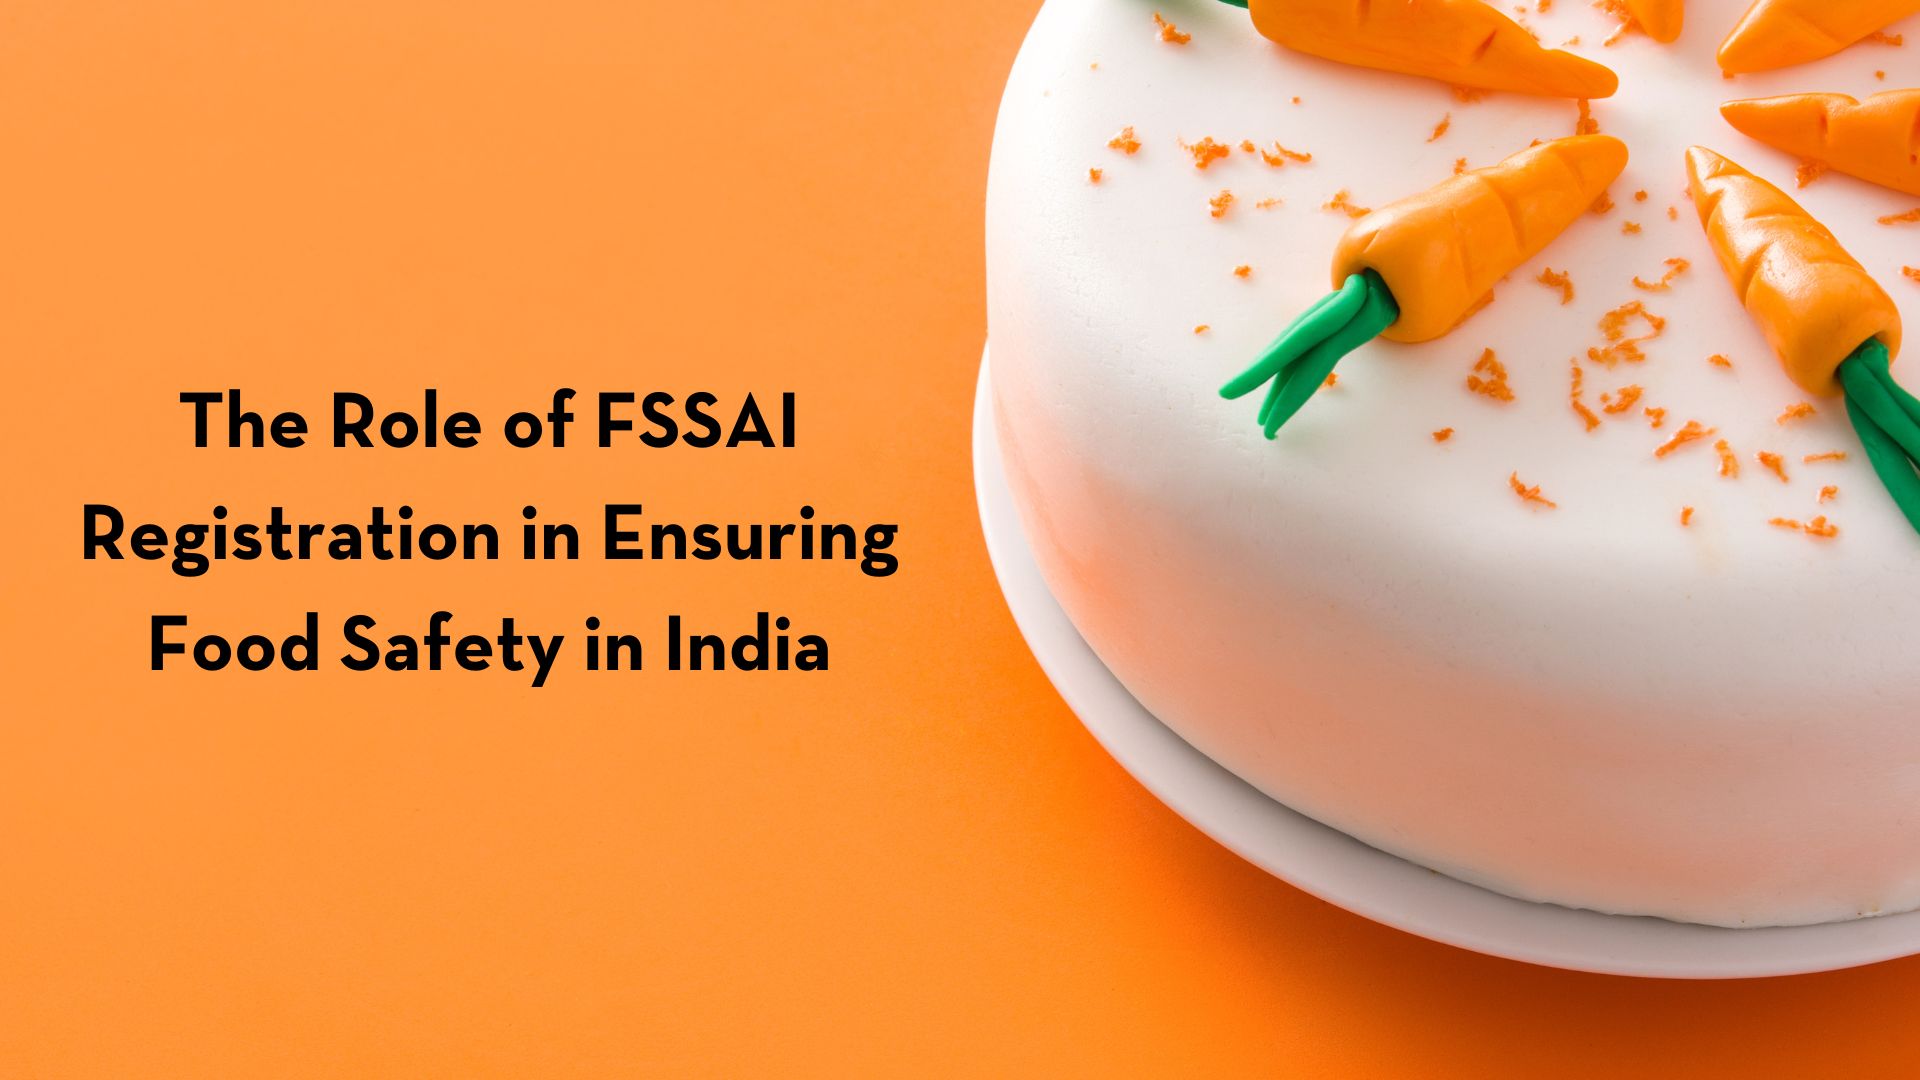 The Role of FSSAI Registration in Ensuring Food Safety in India